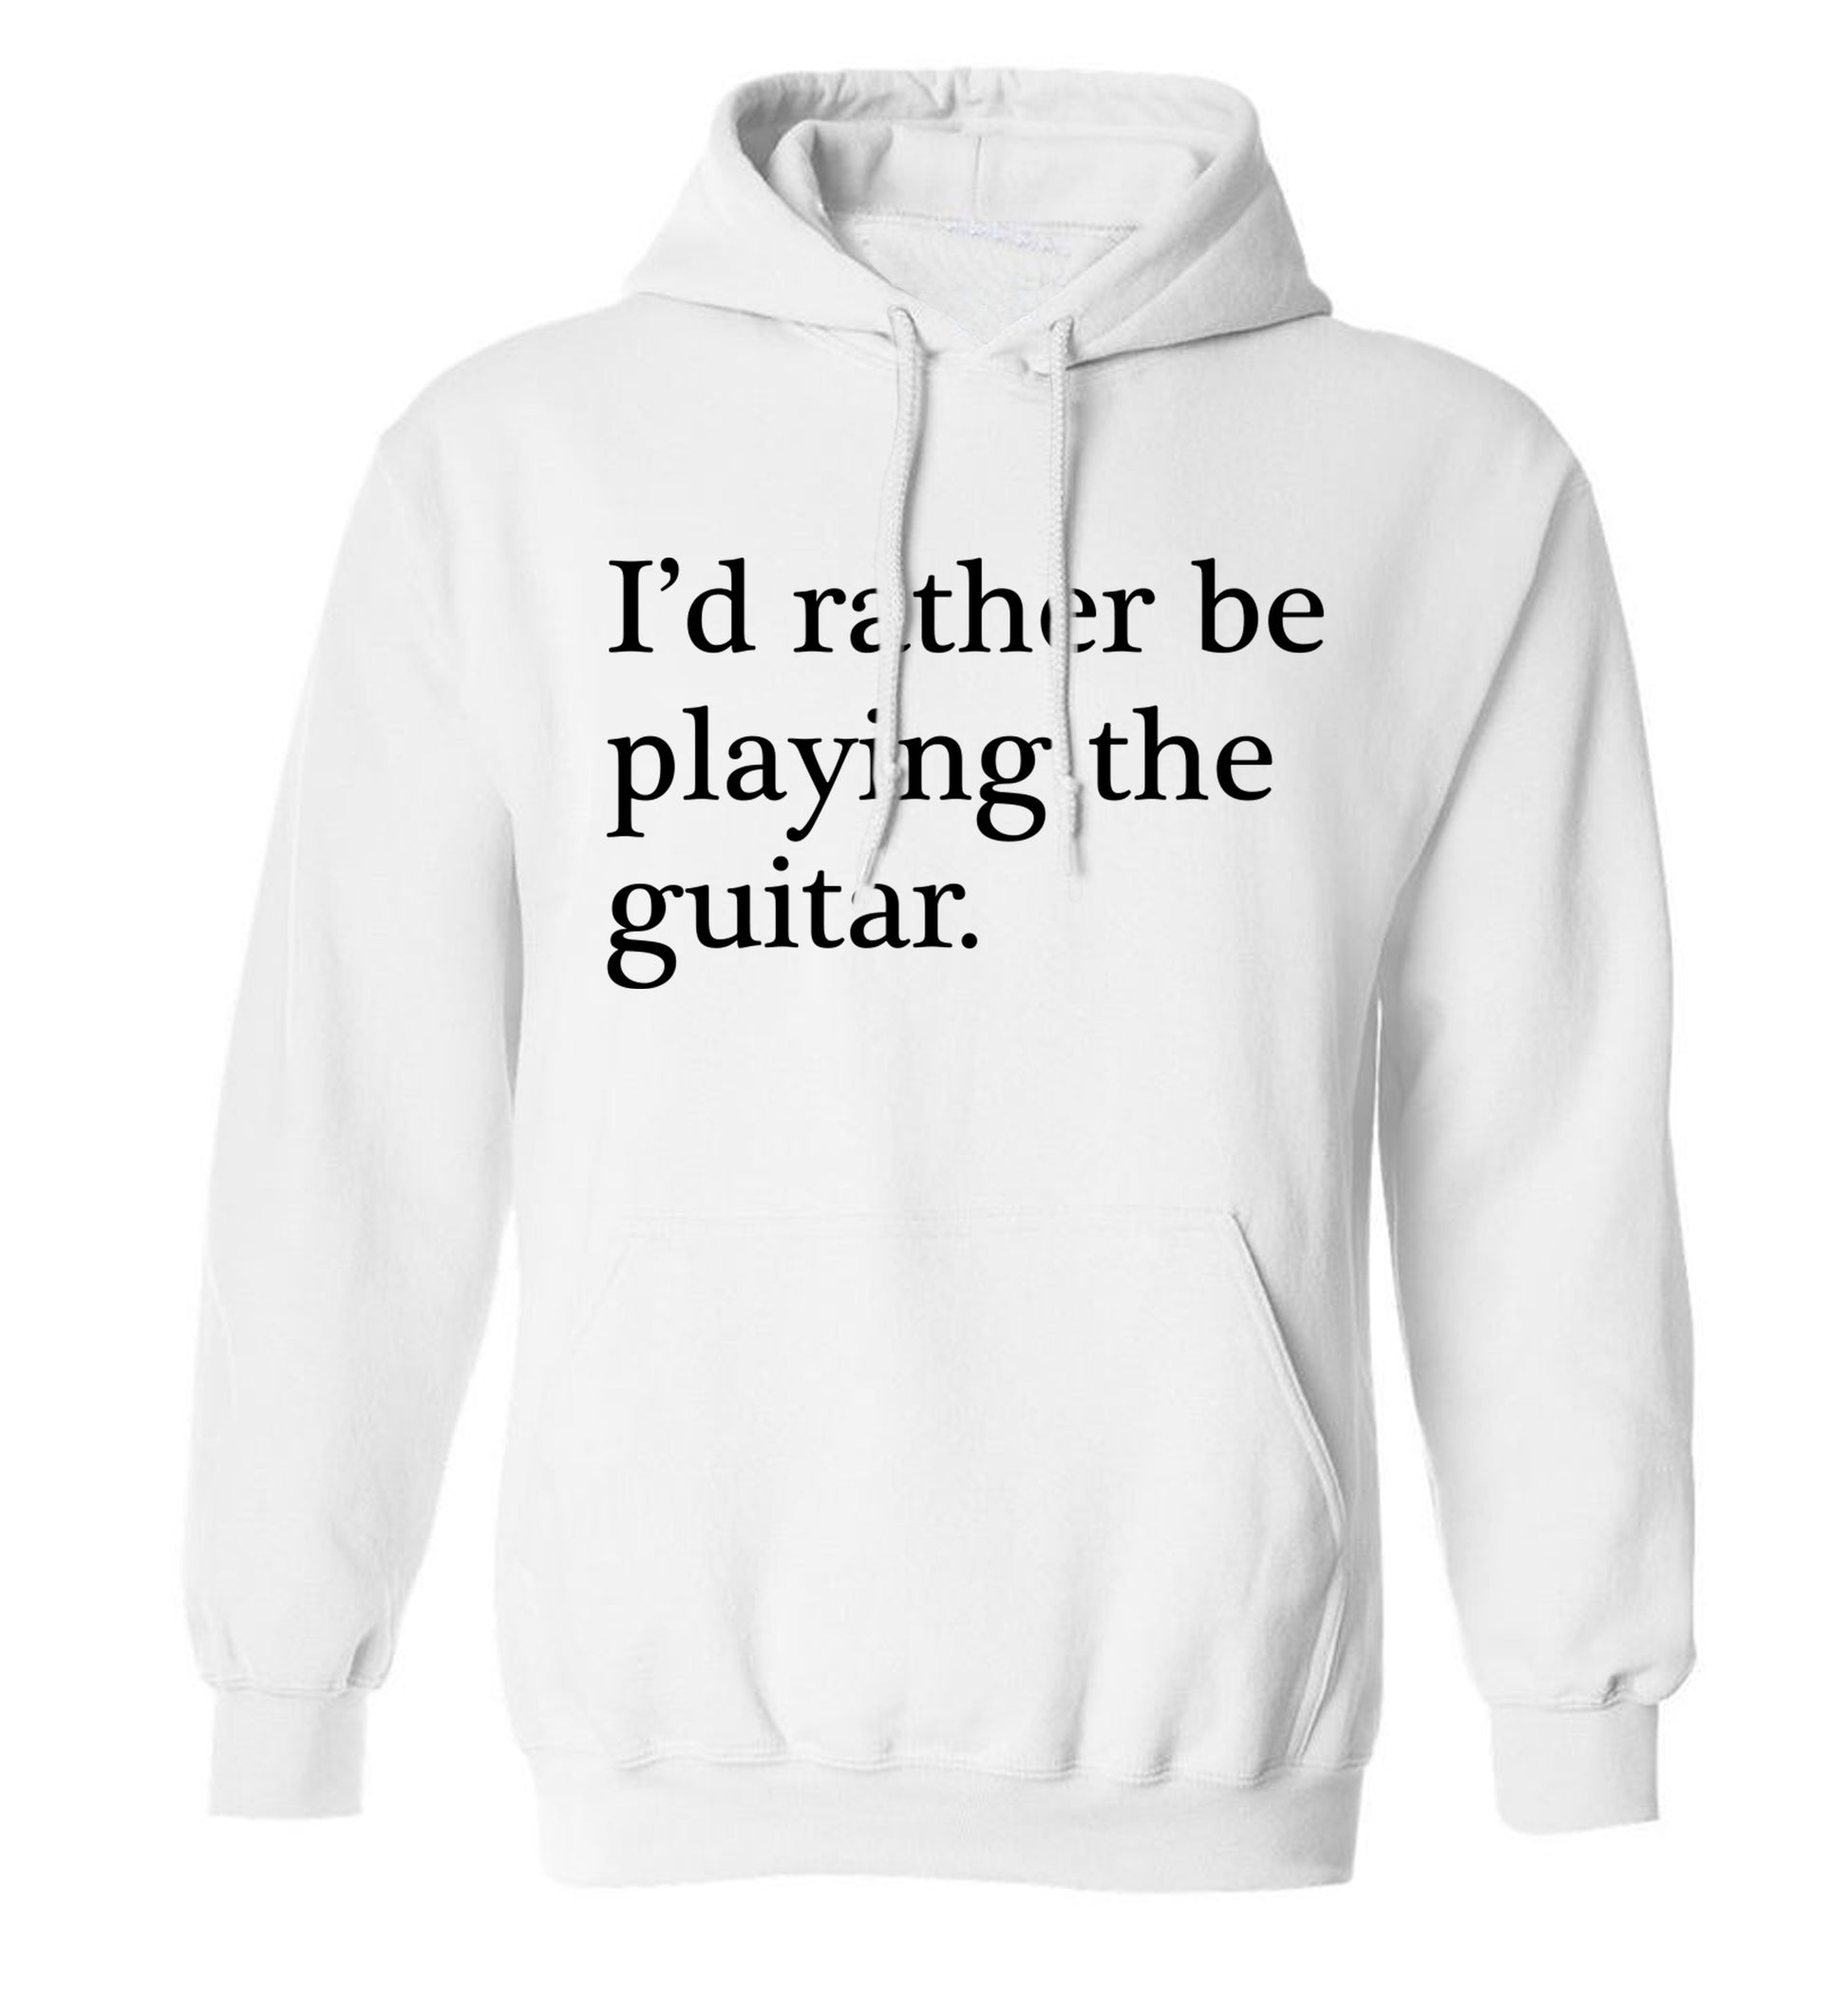 I'd rather be playing the guitar adults unisex white hoodie 2XL